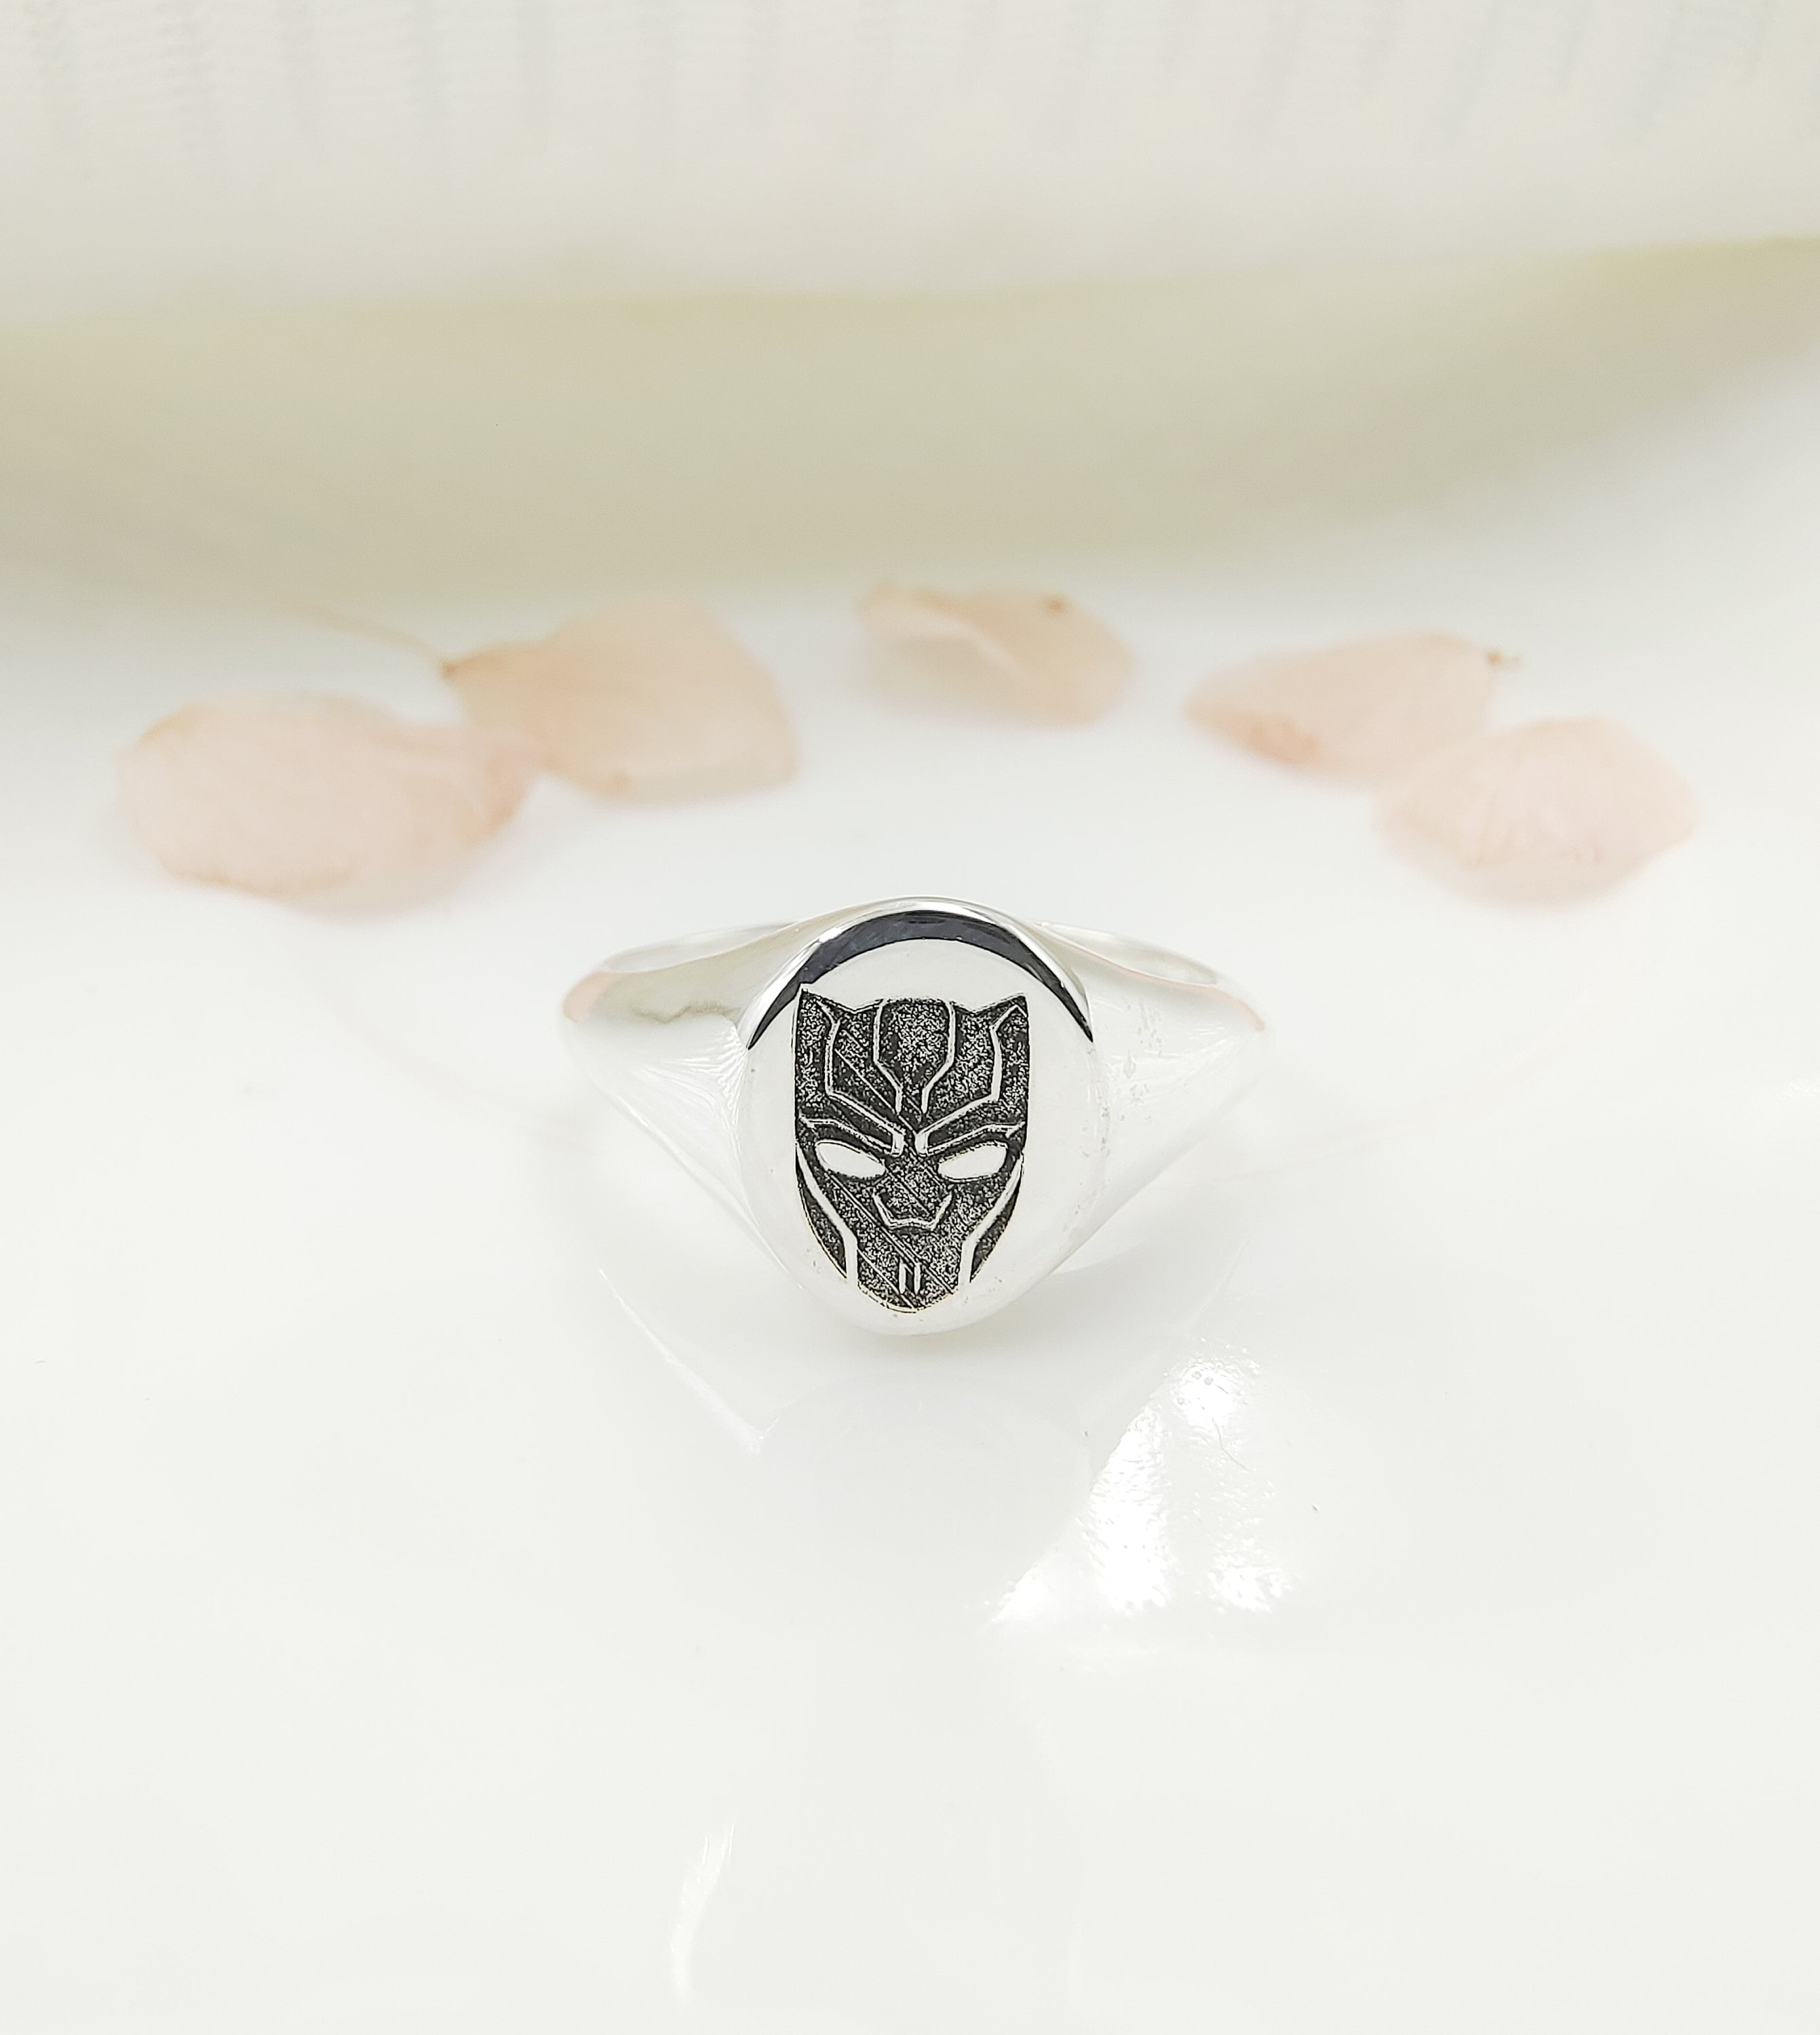 Aspire Jewels Black Panther Ring 925 Sterling Silver Mens Gift Pinky Signet Ring Wild Animal Lovers Gifts Gift him Men Silver Girl Women Fashion ring 3a95ffaf 1f52 4469 b66b 76a8a0ea3eb1.fe55c82df616c8d76e8d0ca33ec4d151